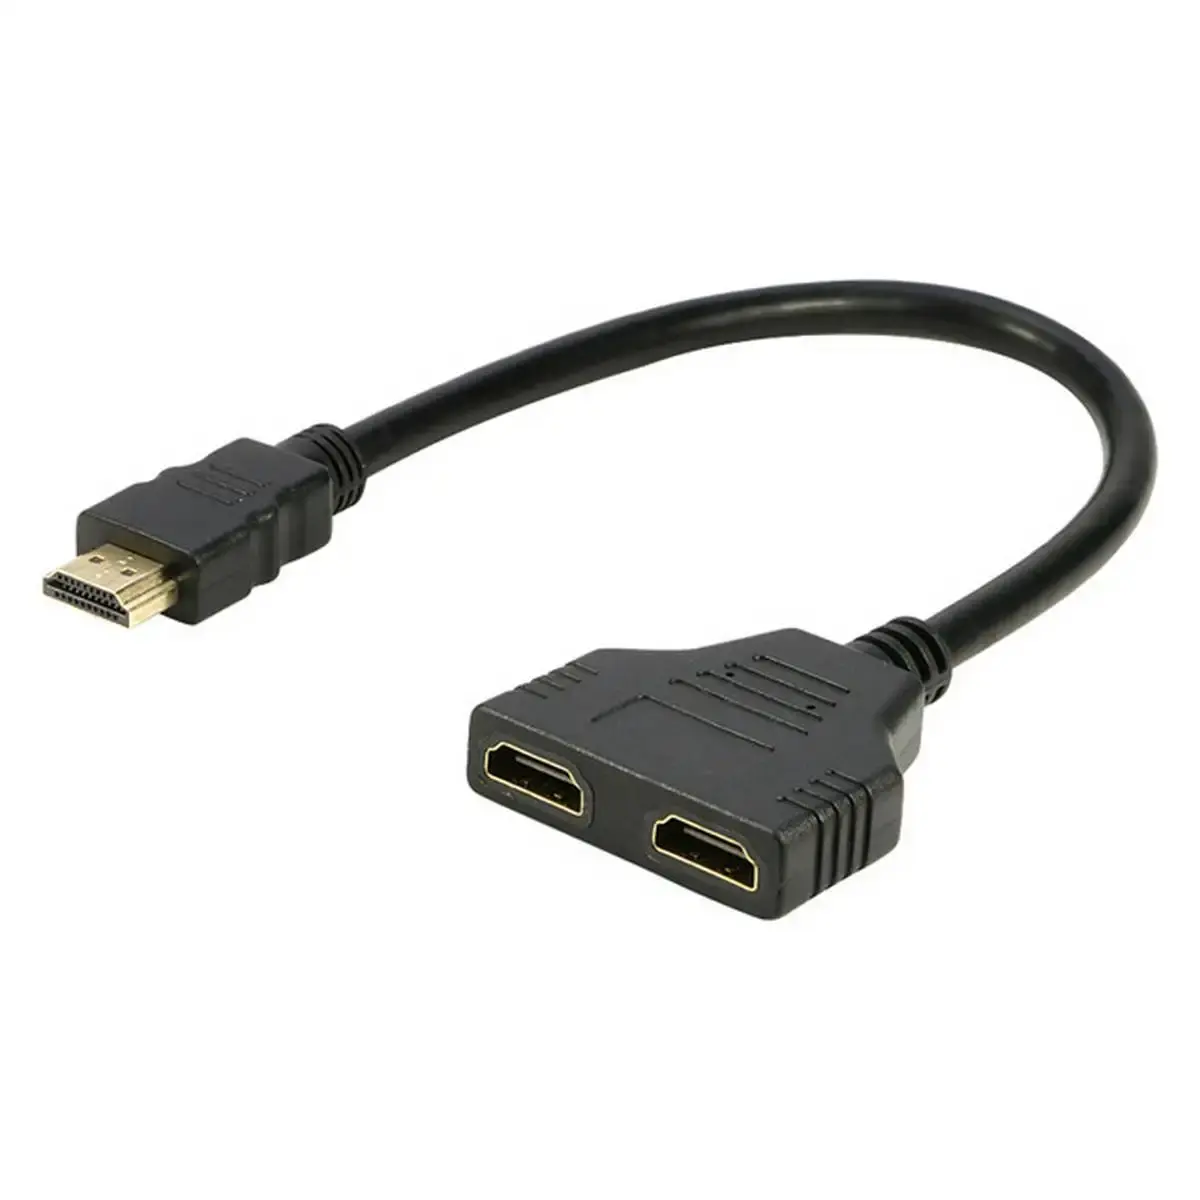 HDMI Adapter 1 in 2 Out HDMI Switcher HDTV Adapter Male to Female Conversion Cable 25CM HDTV Splitter Cable